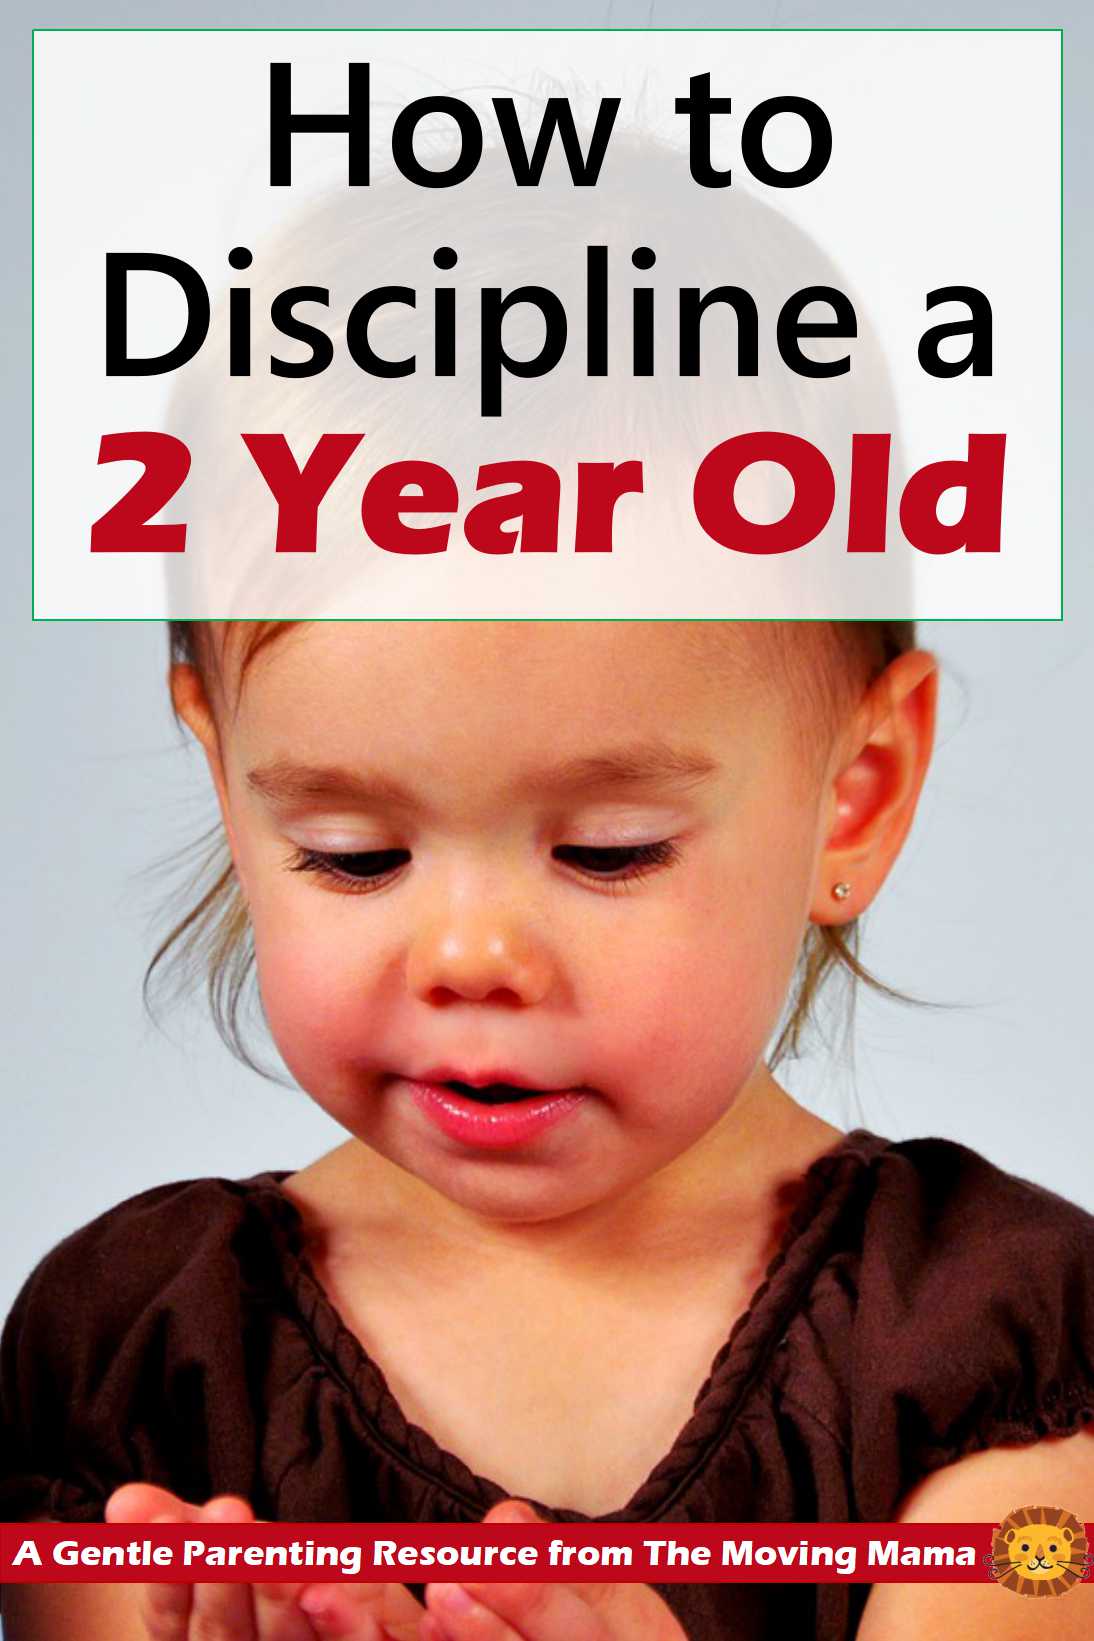 Do you want to know how to discipline a 2 year? It can be simple and gentle to discipline a two year old, without yelling, timeouts or punishments. Click here to read how. #gentleparenting #toddlerdiscipline #toddlers #positiveparenting